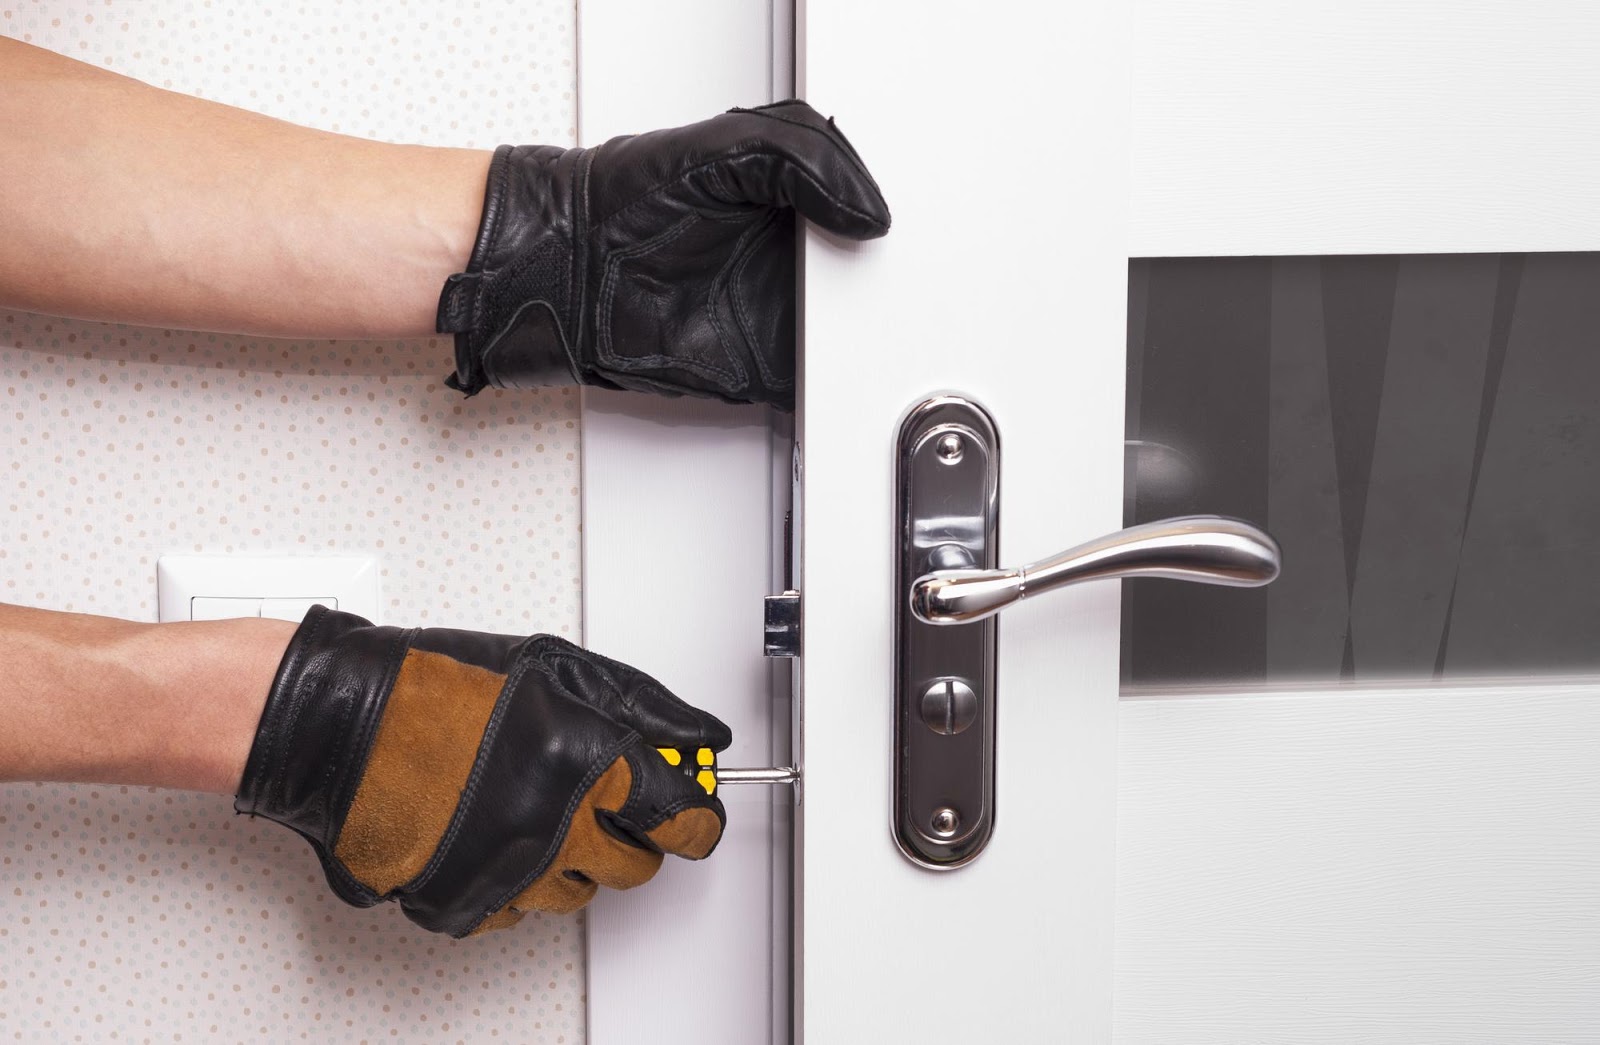 A Locksmith for Break-In Services